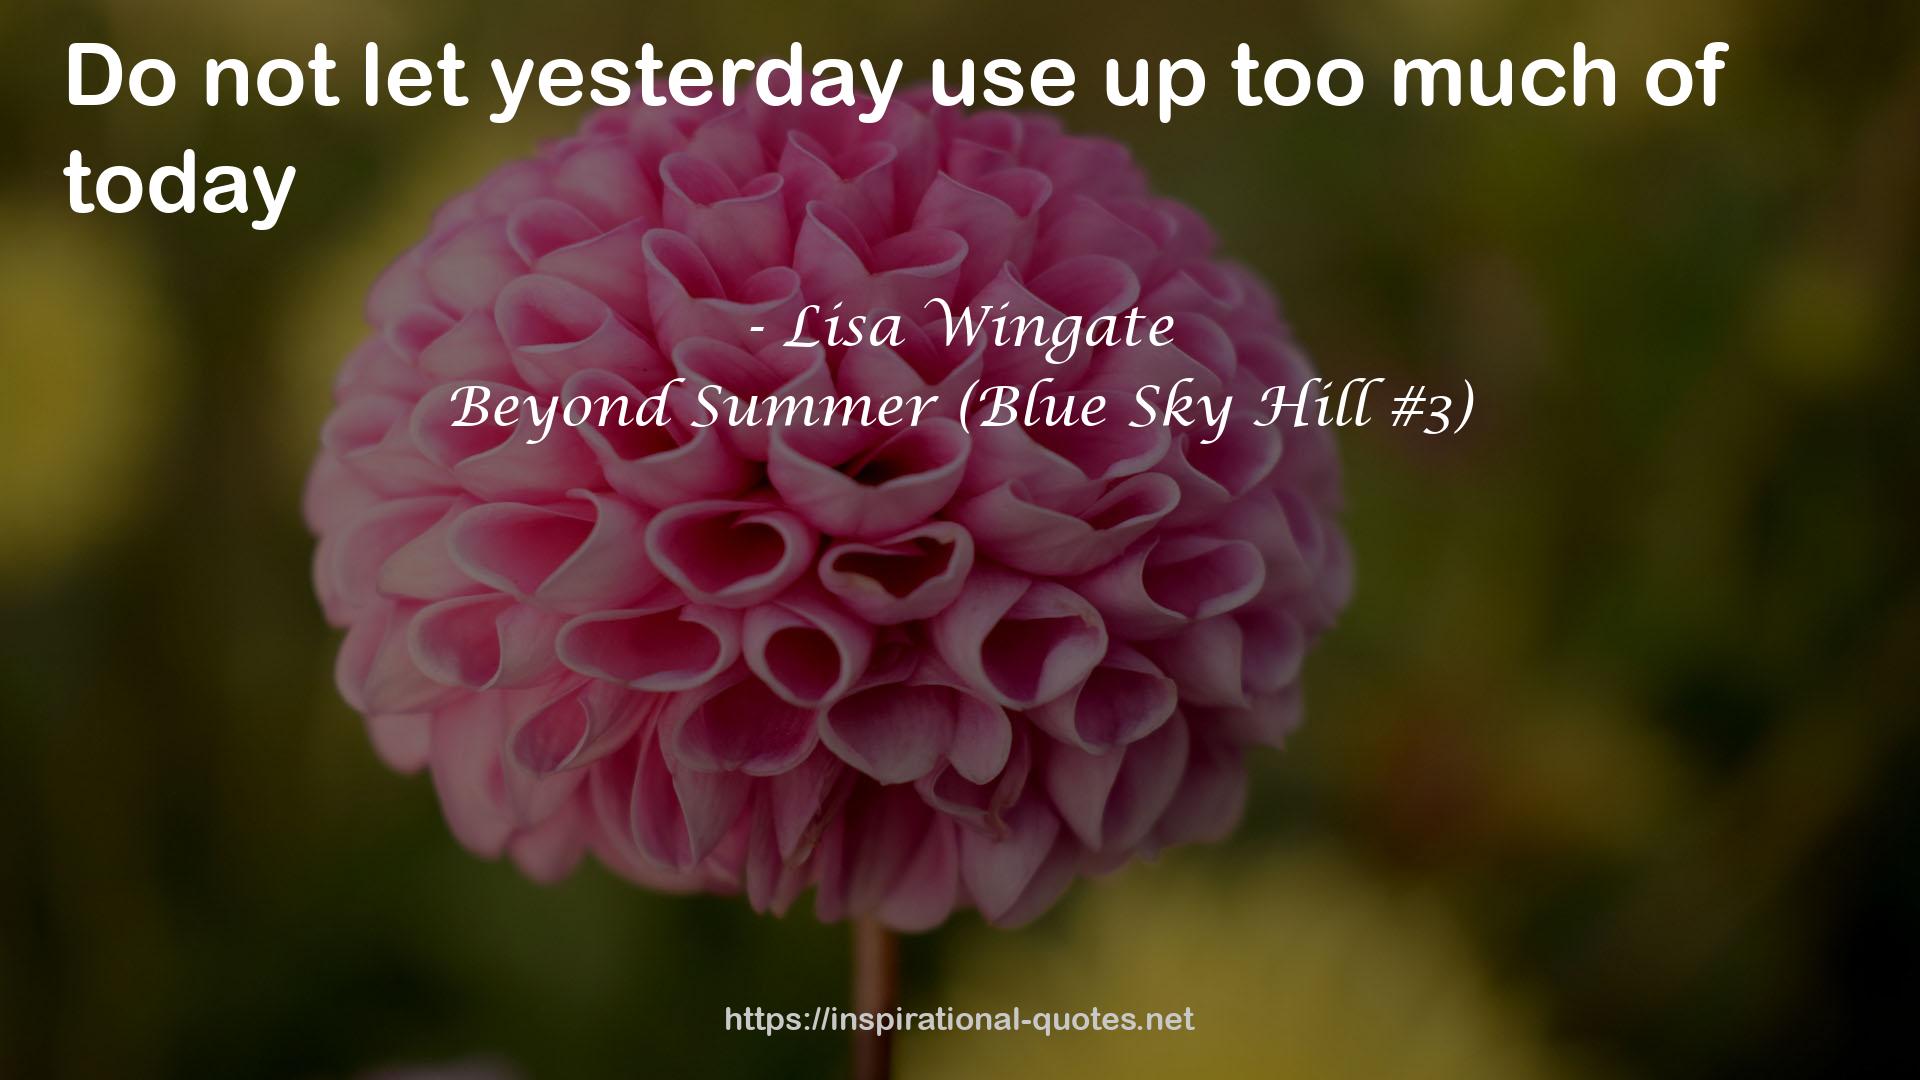 Beyond Summer (Blue Sky Hill #3) QUOTES